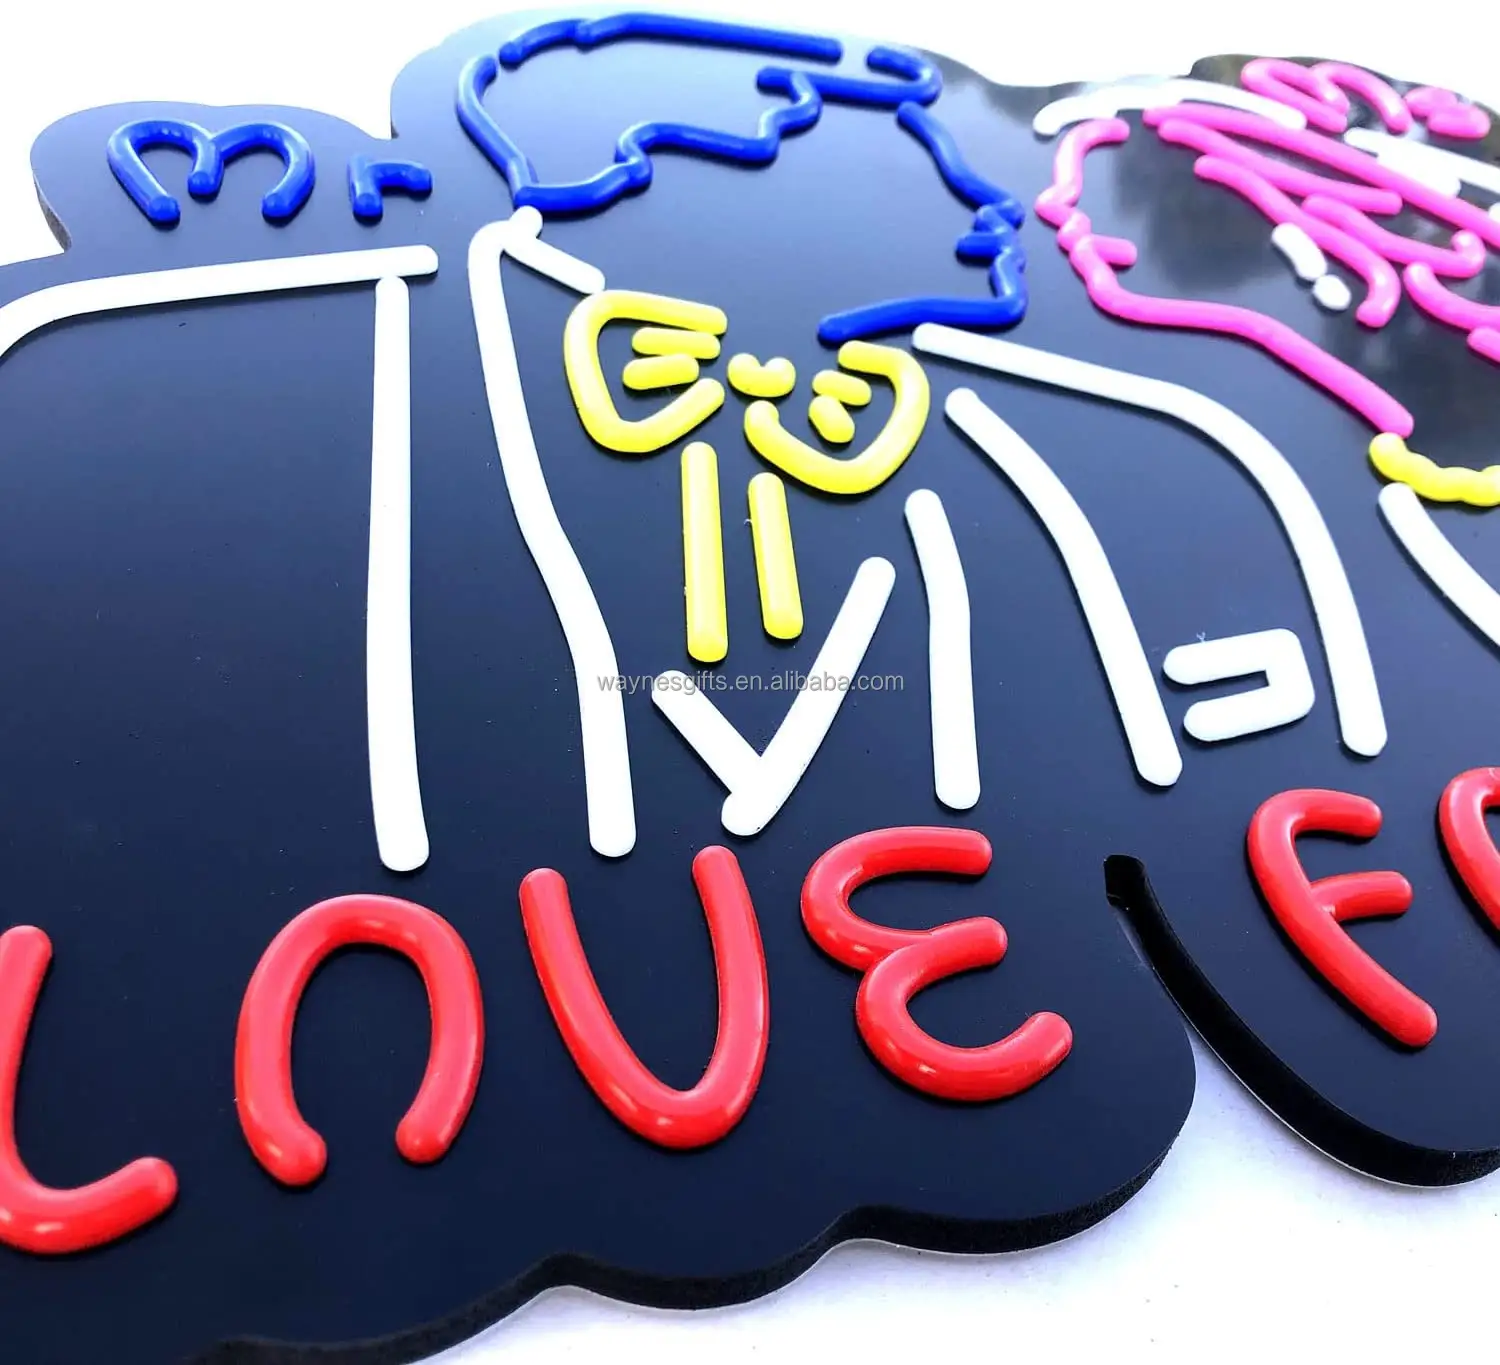 Love Forever Neon Lights Ultra-thin Design Mr&Ms LED Neon Sign is Suitable for Home Decoration or Office, Bar, Recreation Room G